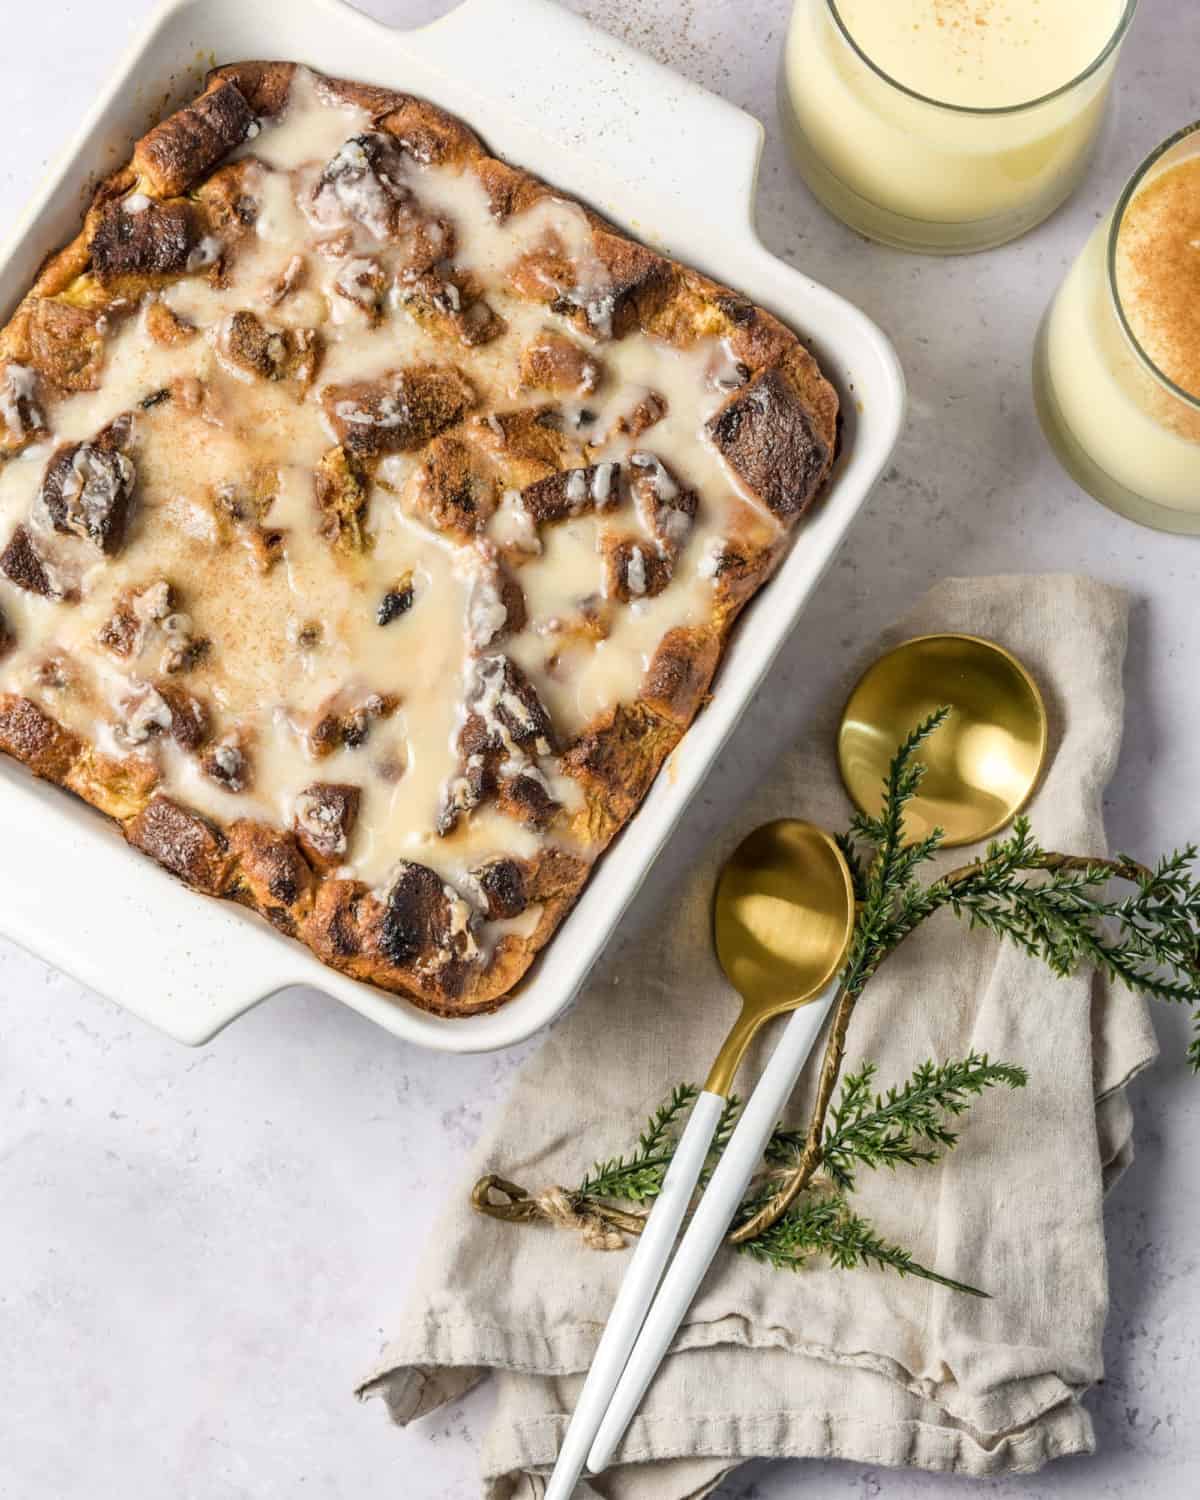 Finished bread pudding in a baking dish.